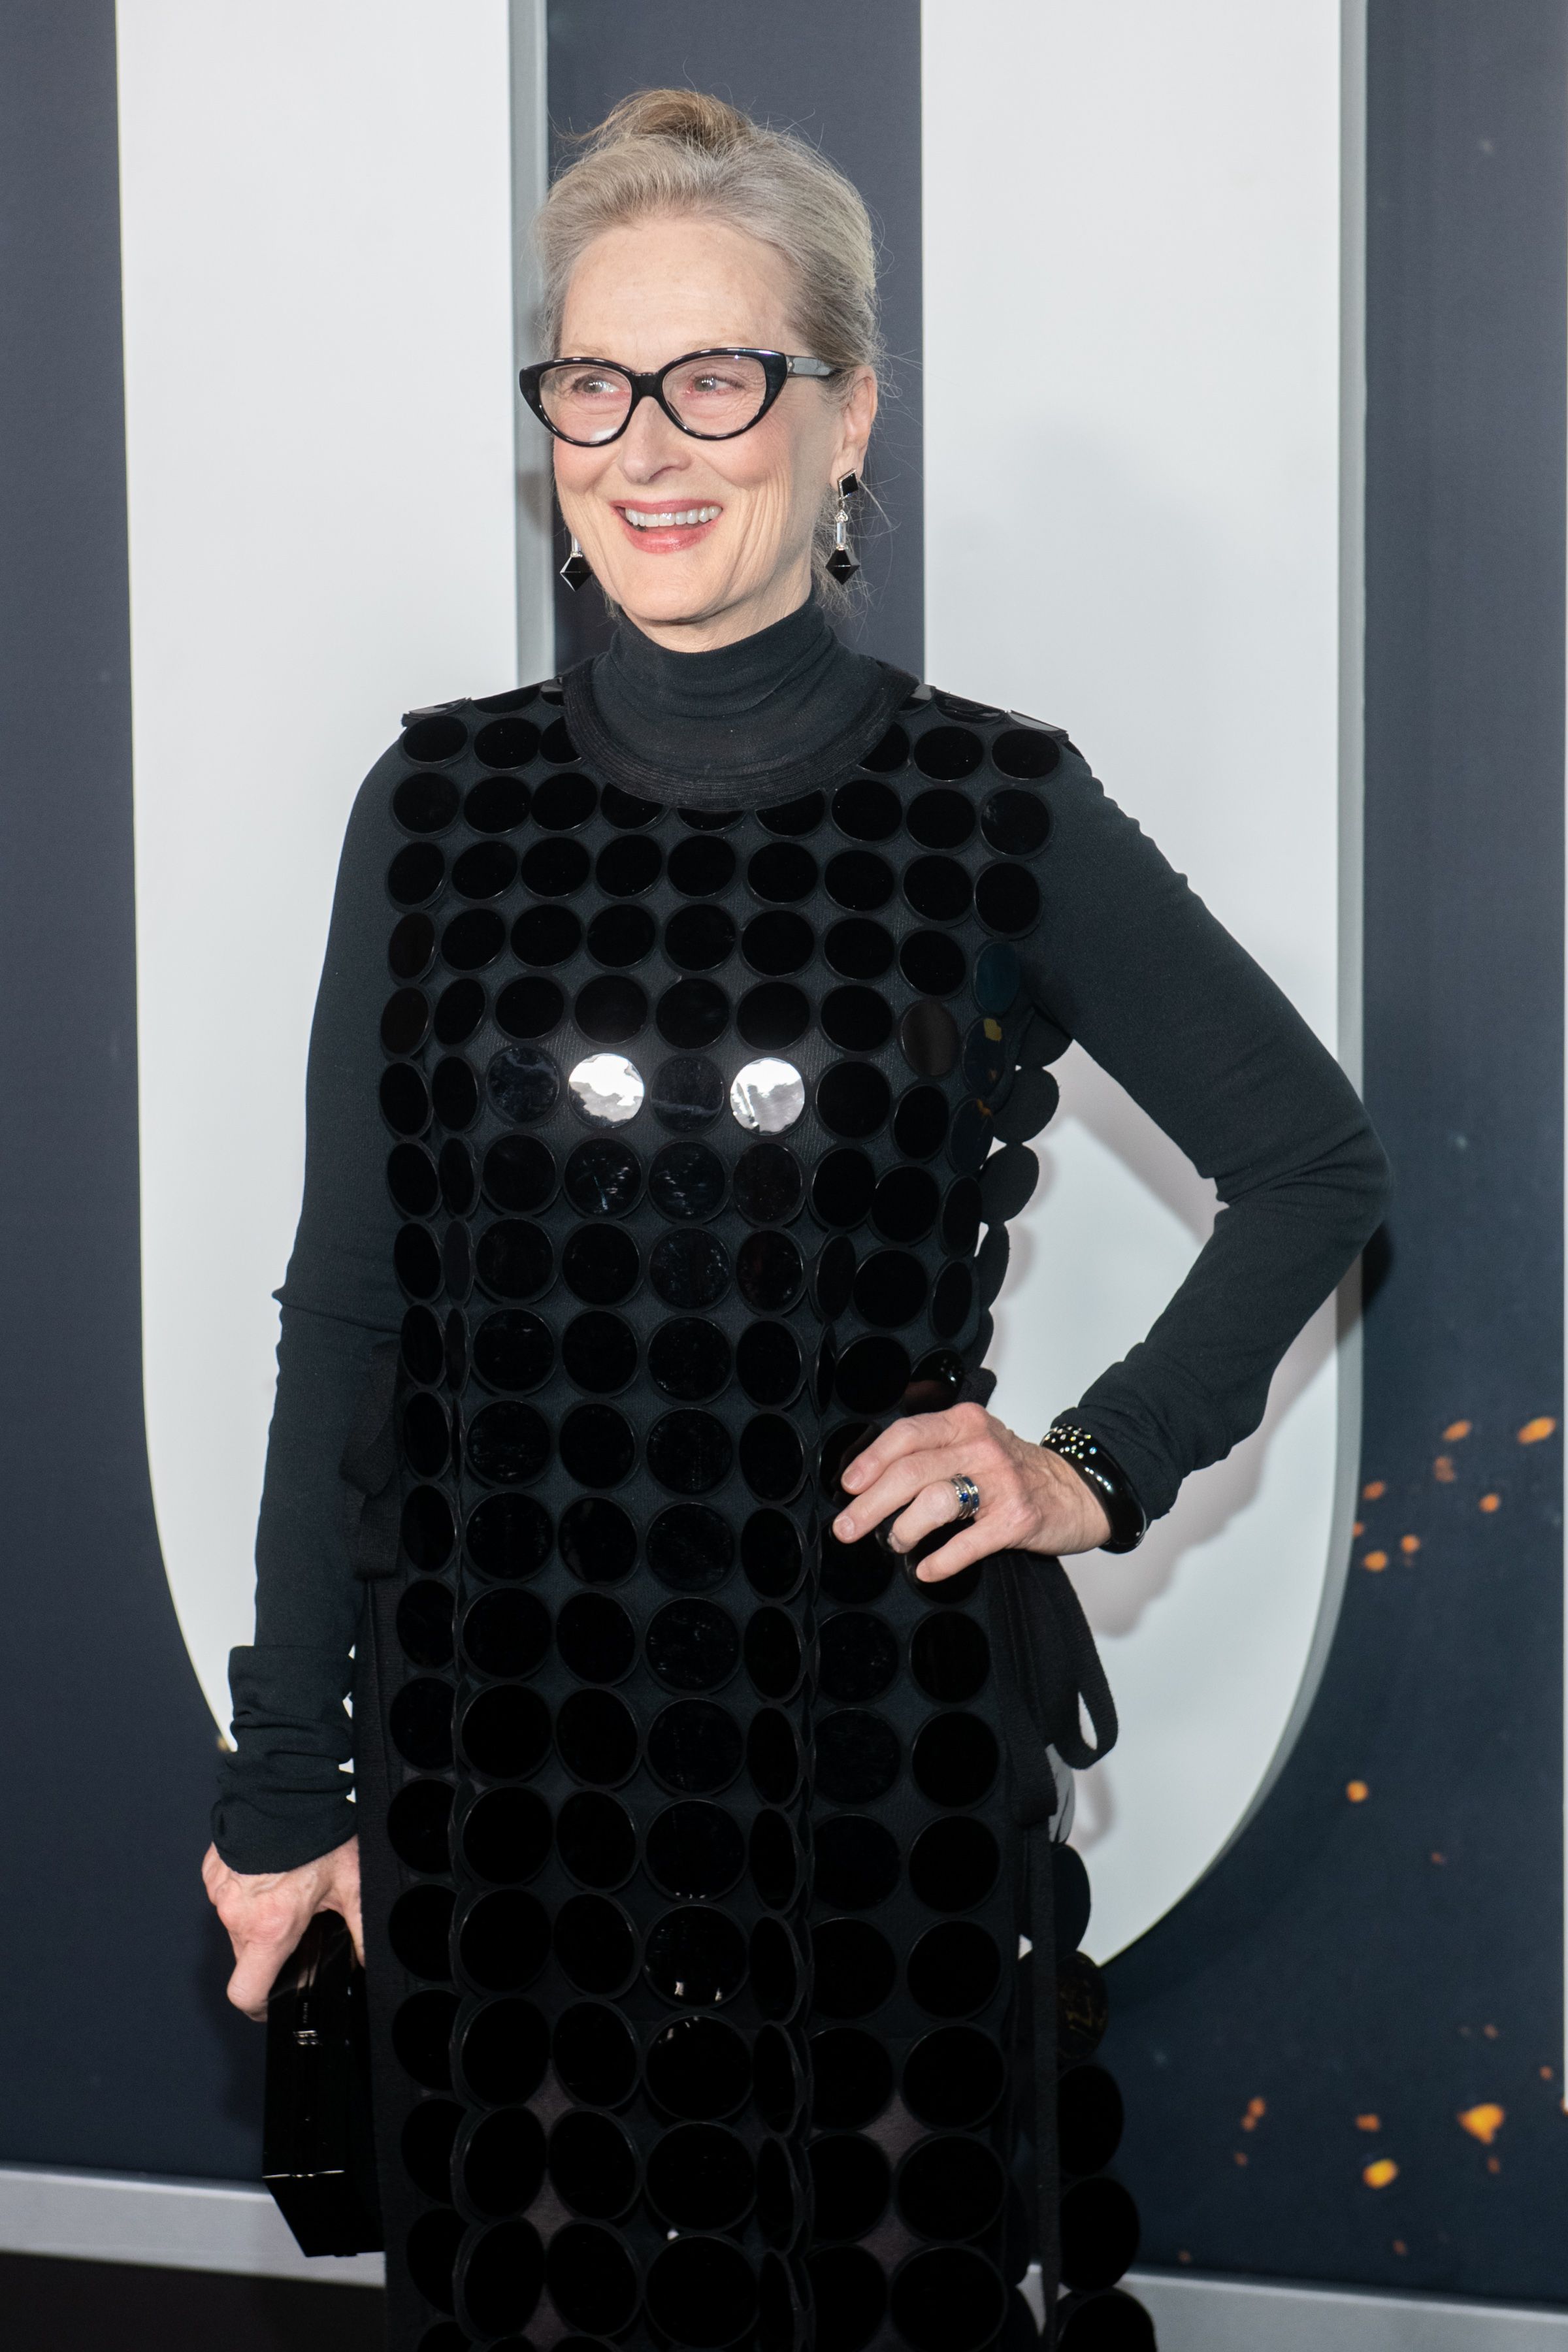 Meryl Streep during the "Don't Look Up" premiere at Jazz at Lincoln Center on December 5, 2021, in New York City. | Source: Getty Images